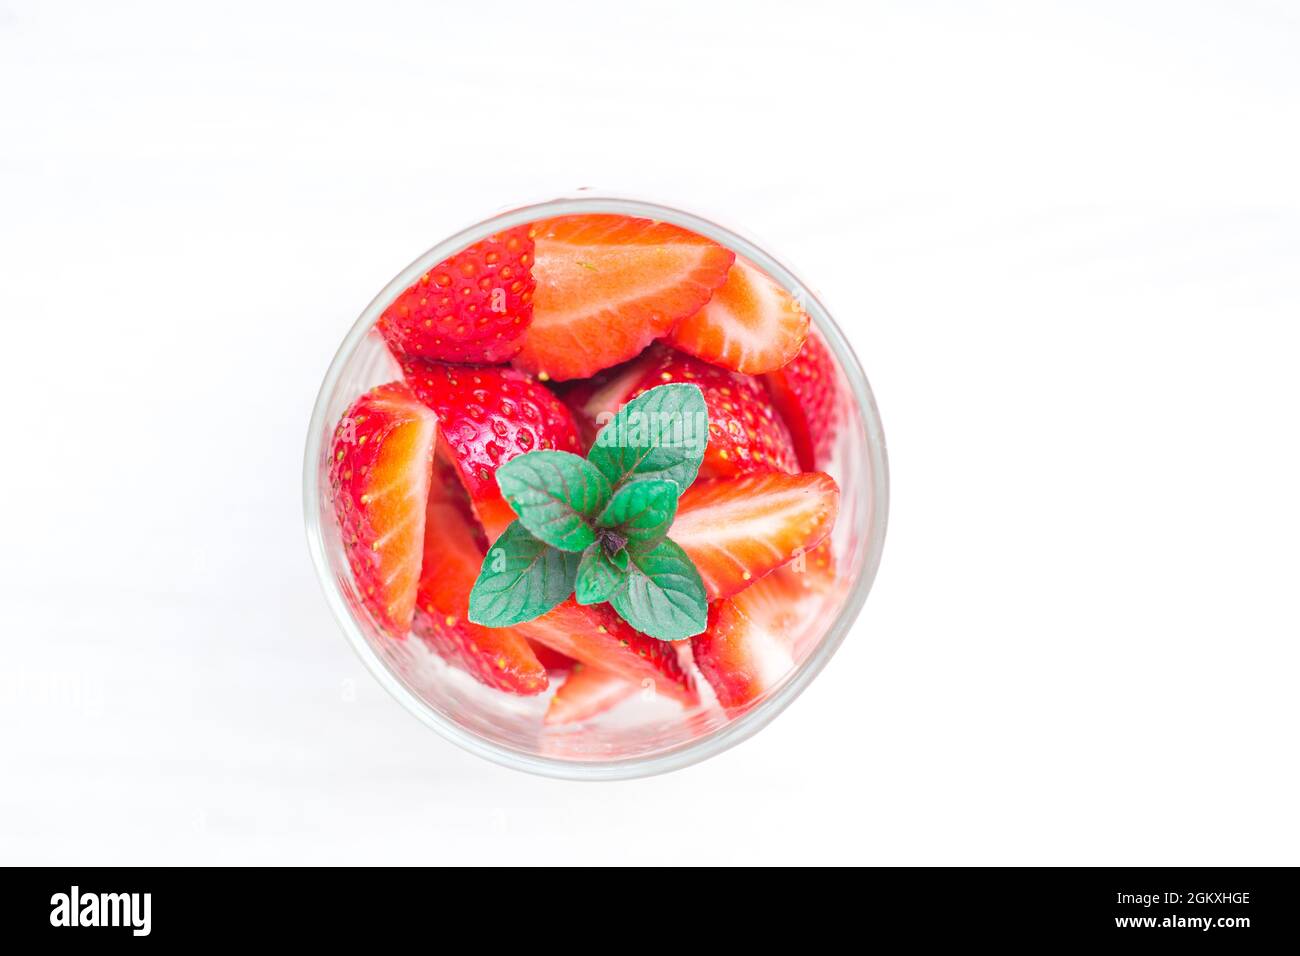 Glass with pieces of red strawberry and fresh peppermint leaves on top. Top view to a round dessert on white wooden background. Stock Photo